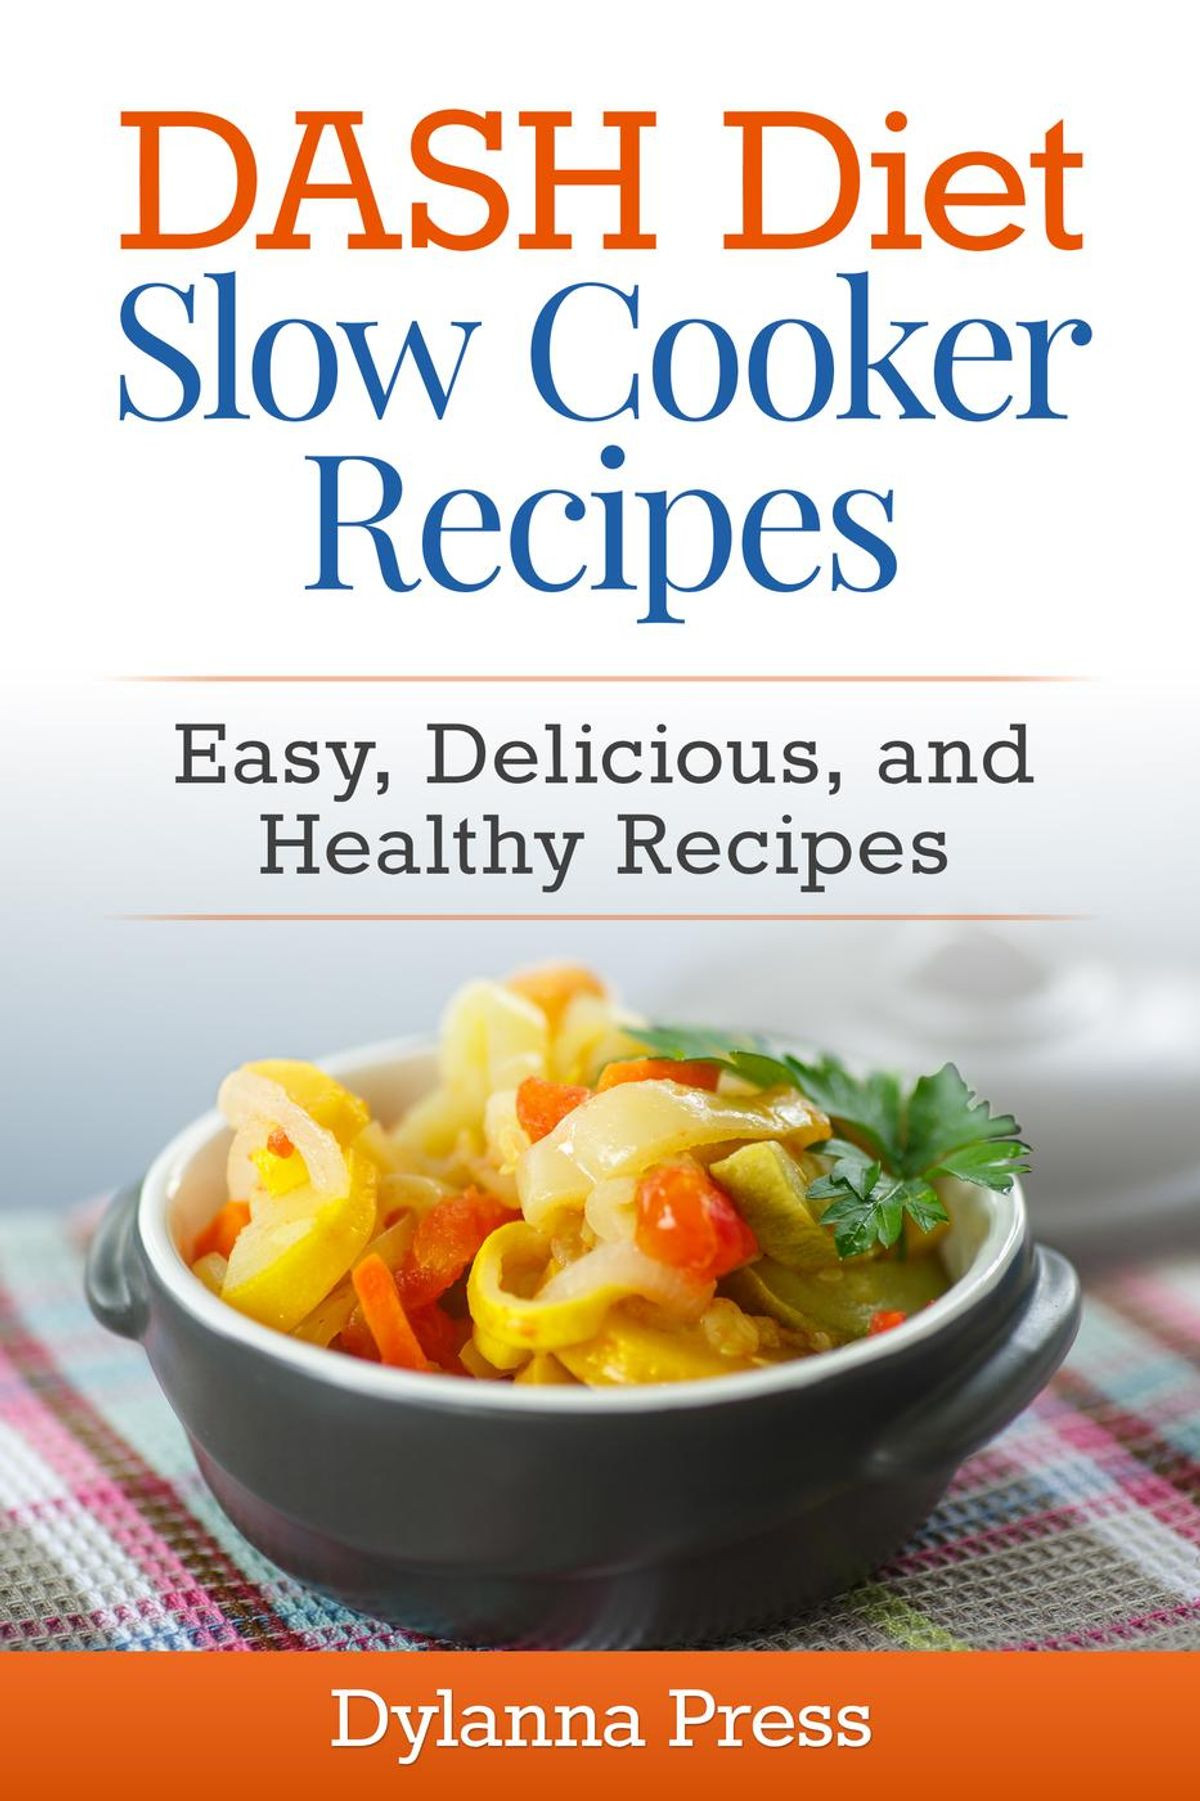 Low Sodium Slow Cooker Recipes
 DASH Diet Slow Cooker Recipes Easy Delicious and